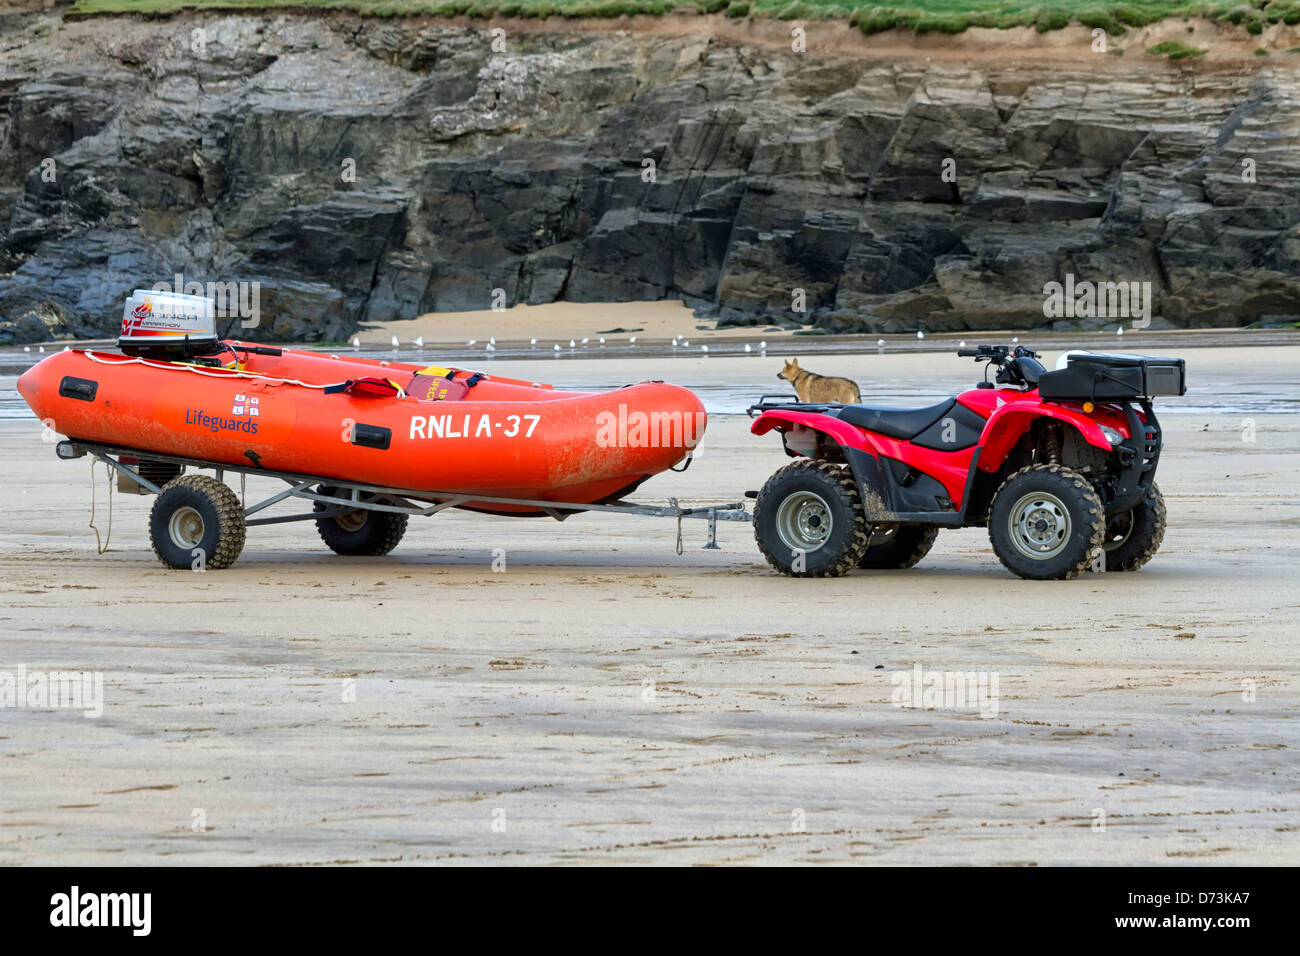 RNLI embarcation de sauvetage gonflables, Harlyn Bay, Cornwall, Angleterre Banque D'Images